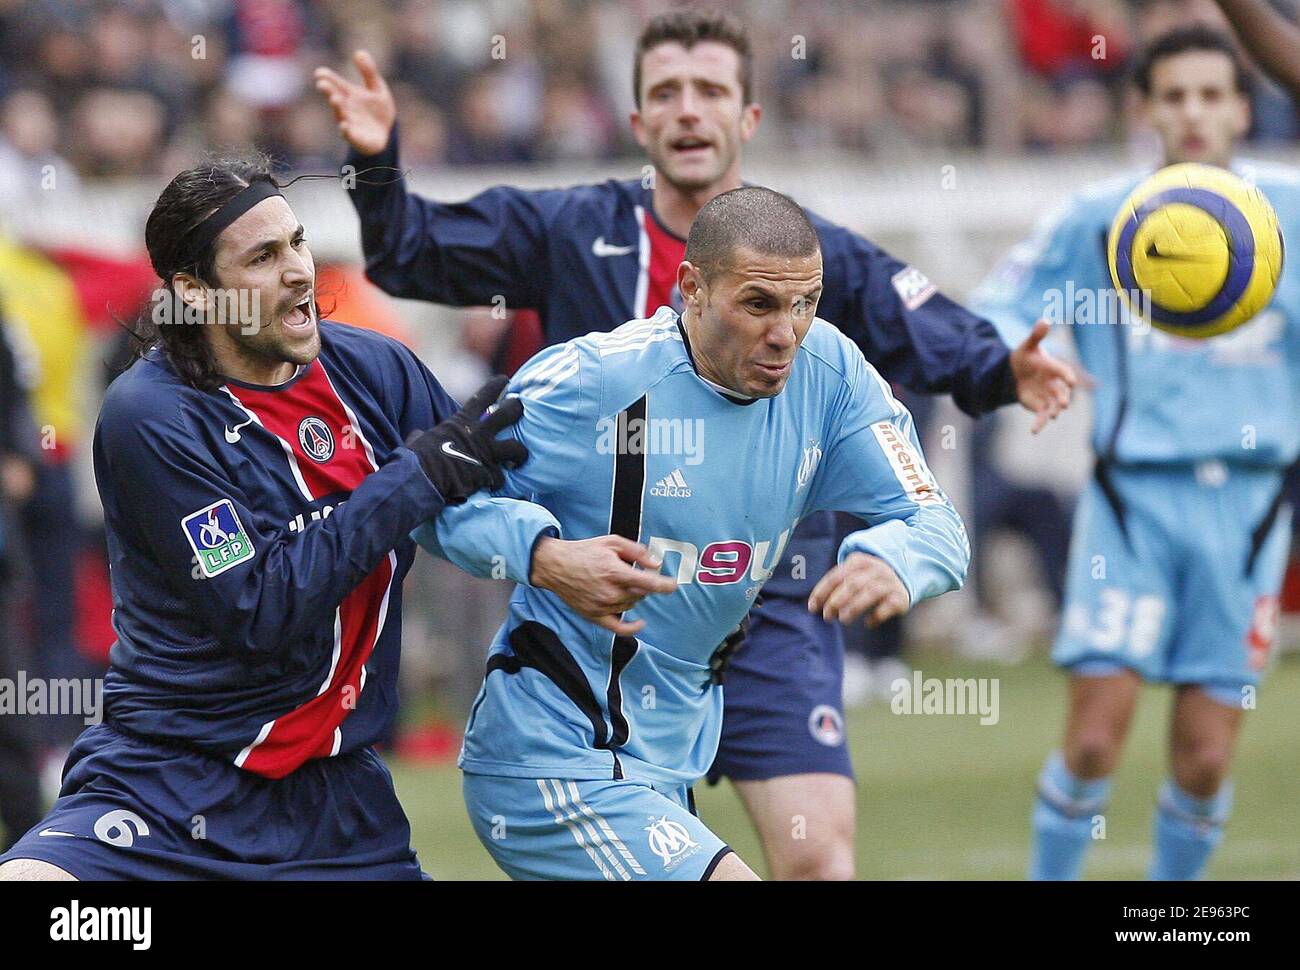 PSG's Mario Yepes and OM's Christian Gimenez in action during the French first league football match Paris Saint-Germain vs Olympique de Marseille at the Parc des Princes in Paris, France, on March 5, 2006. The game ended in a draw 0-0. Photo by Mehdi Taamallah/Cameleon/ABACAPRESS.COM Stock Photo